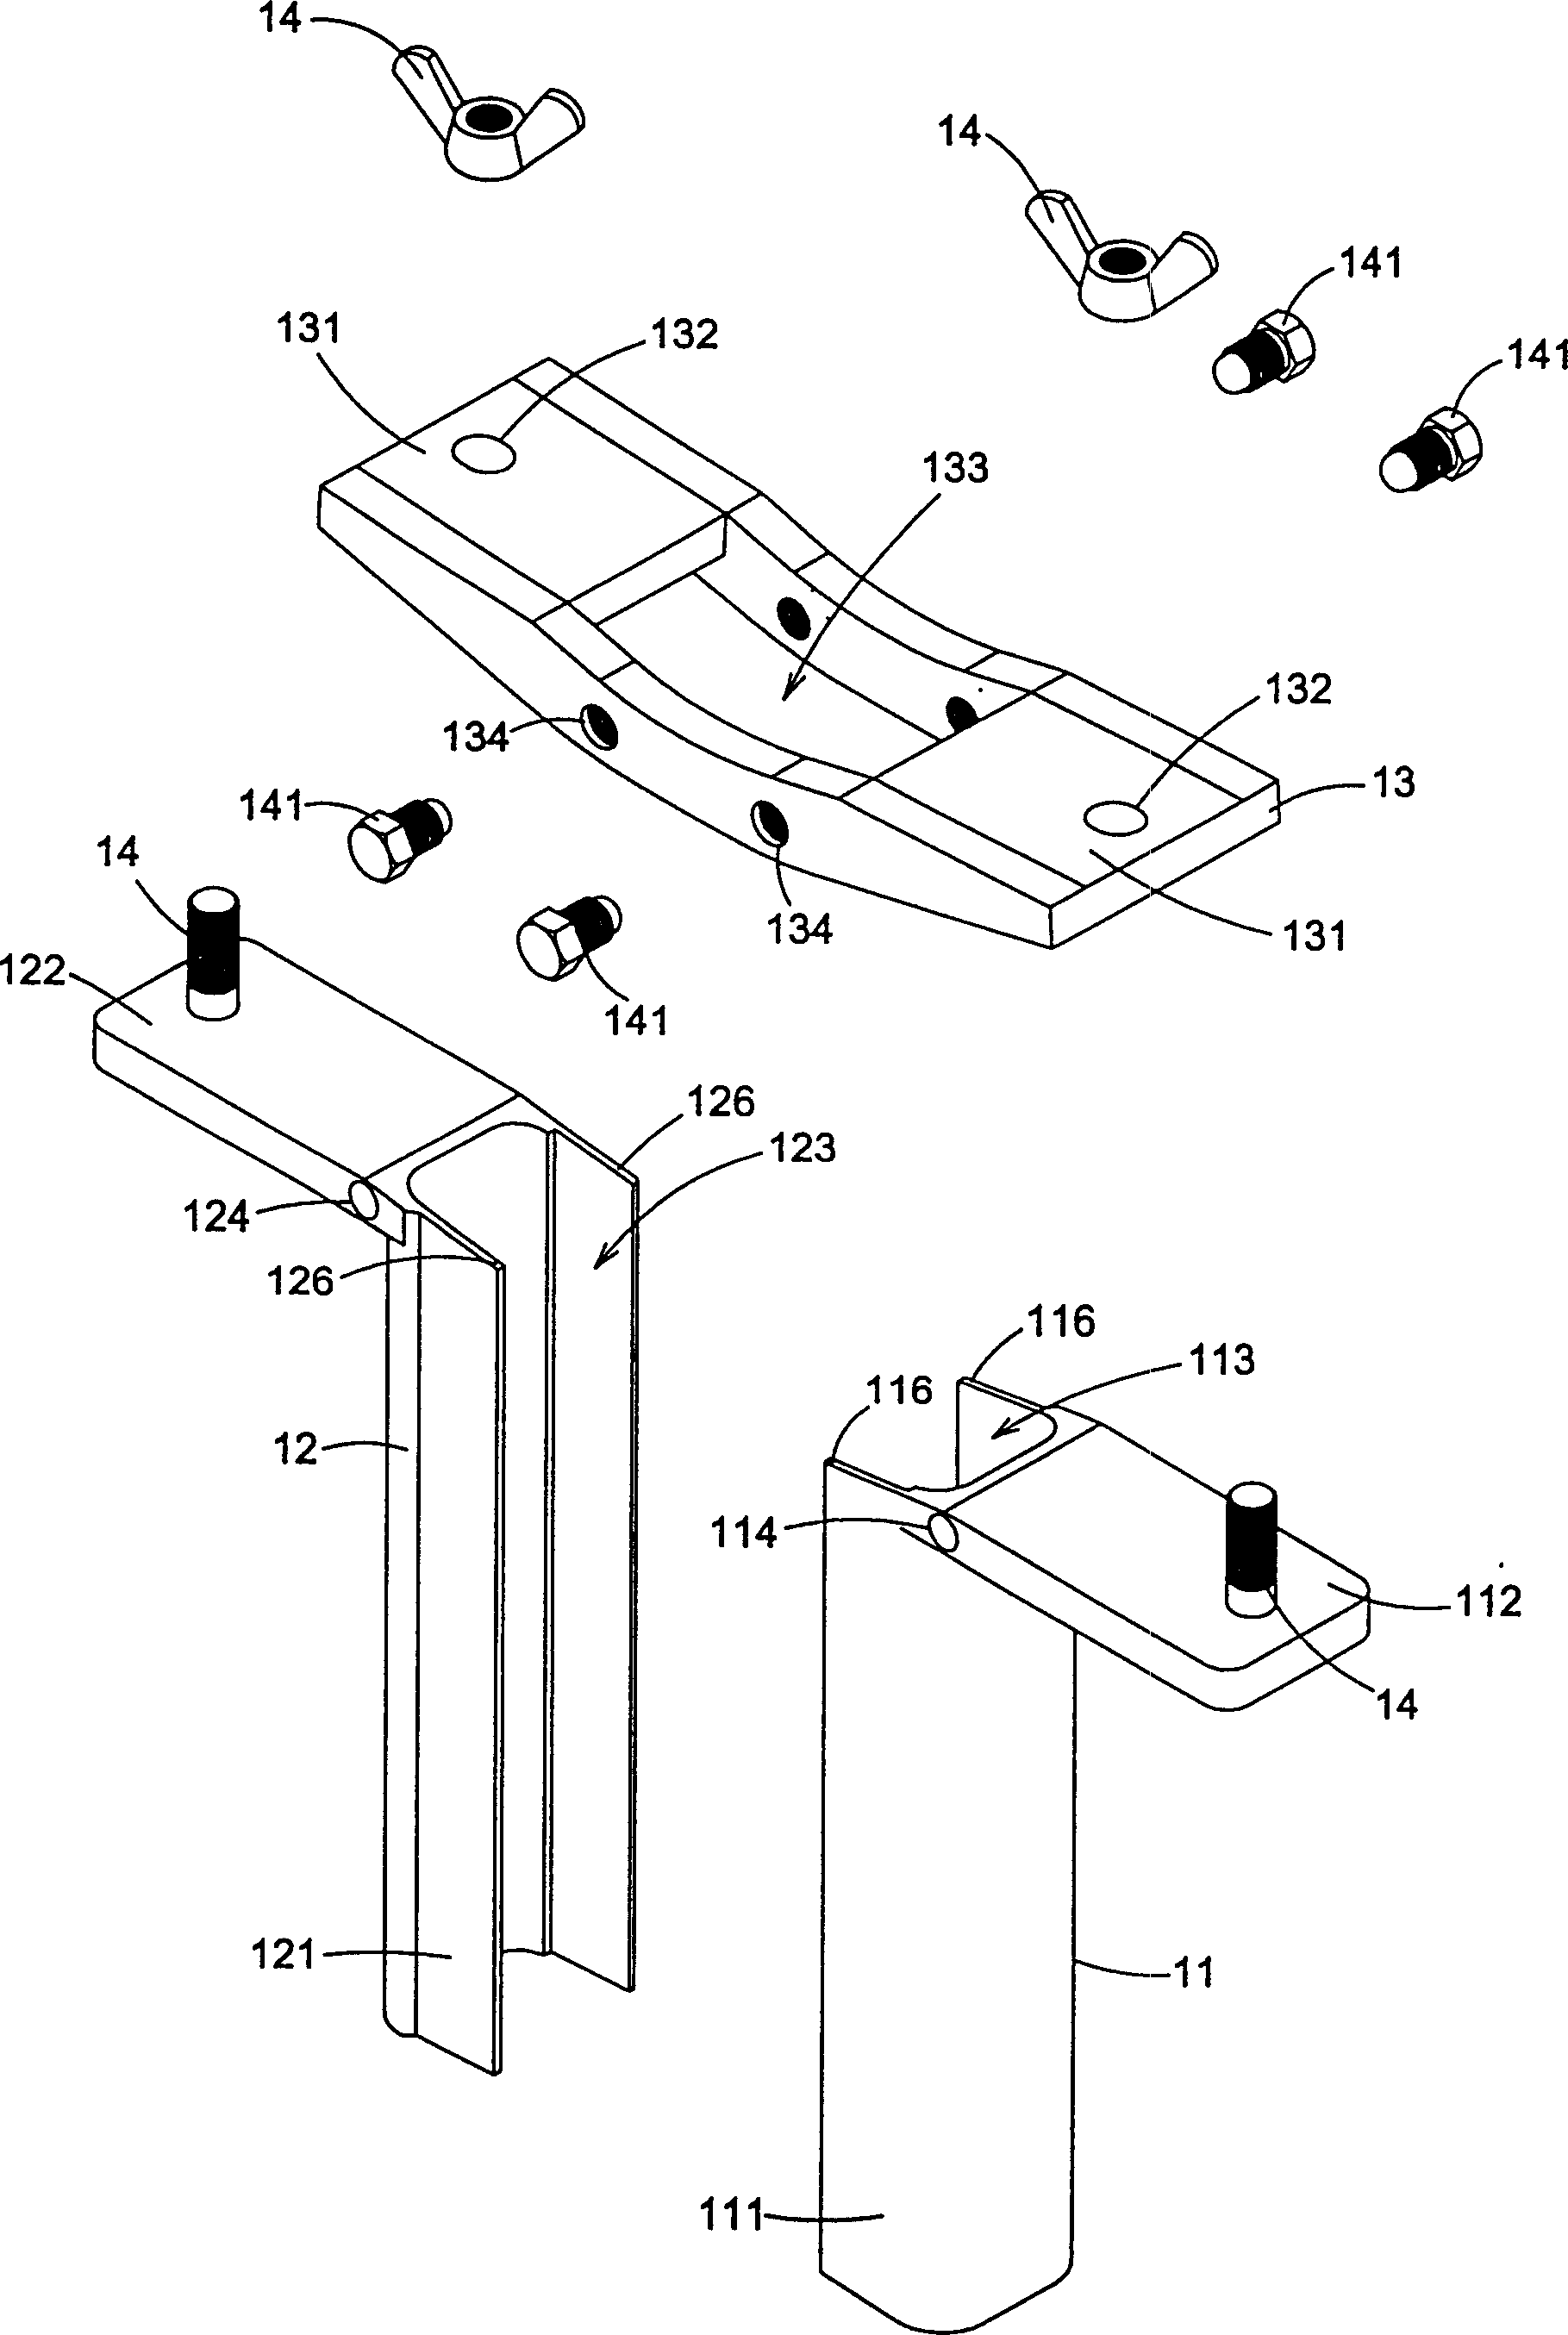 Muscle stretching apparatus for operation